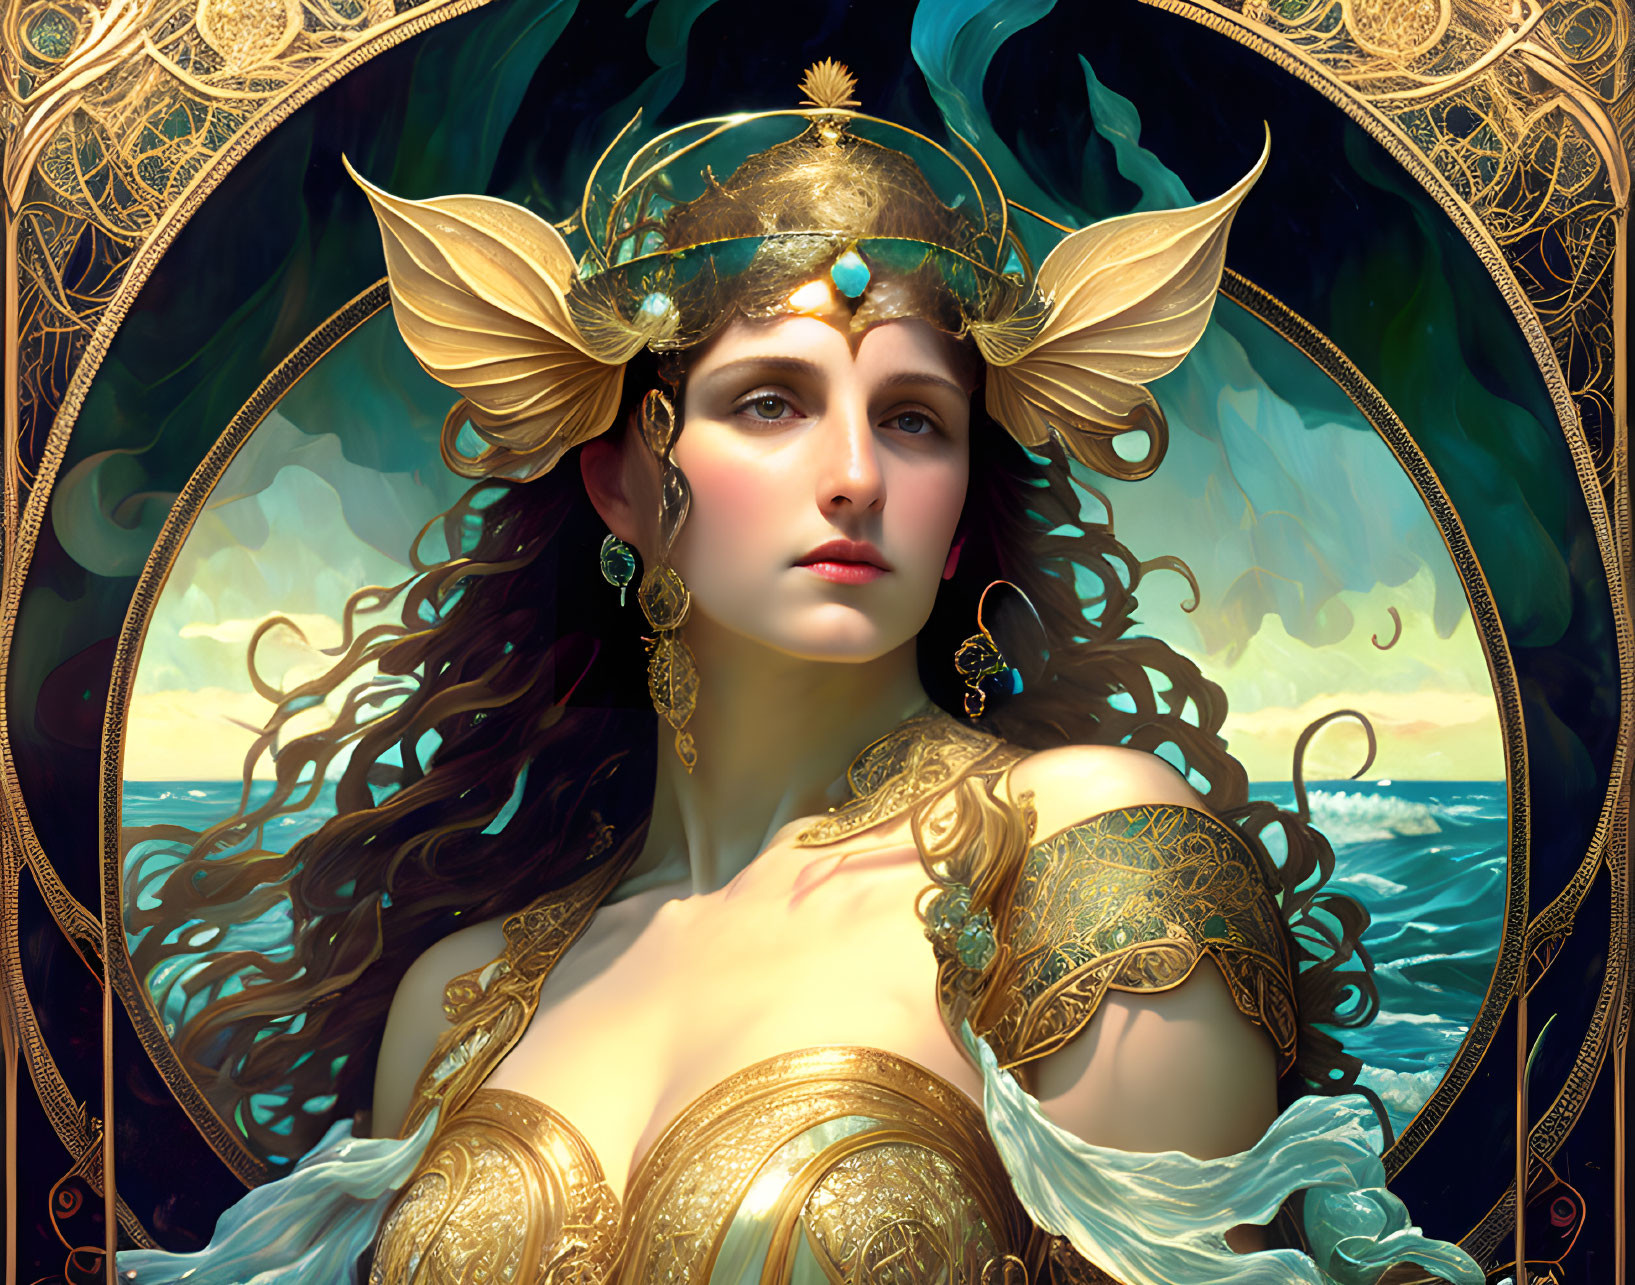 Regal woman with gold headpiece, tattoos, and sea background in elegant frames